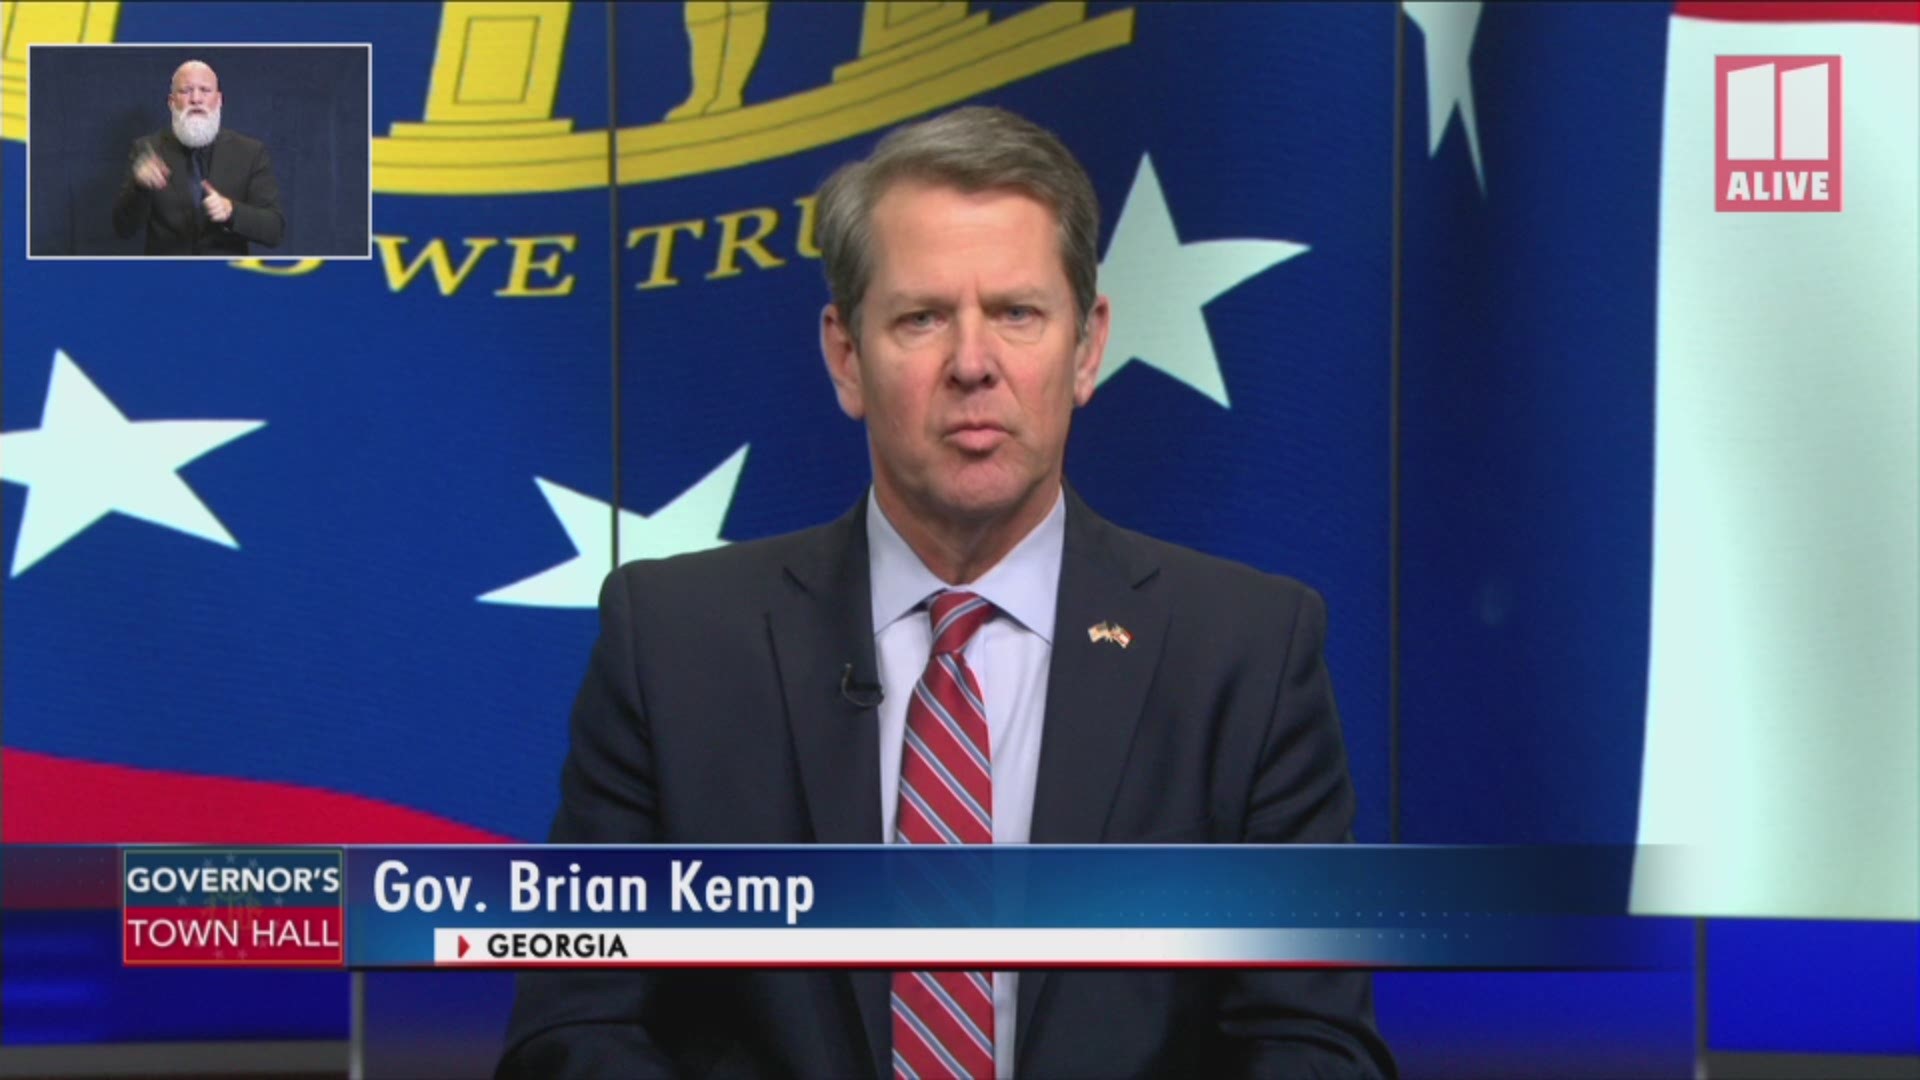 Kemp addressed concerns over not ordering a statewide lockdown and spoke about how the virus is having very different impacts from one county to the next.